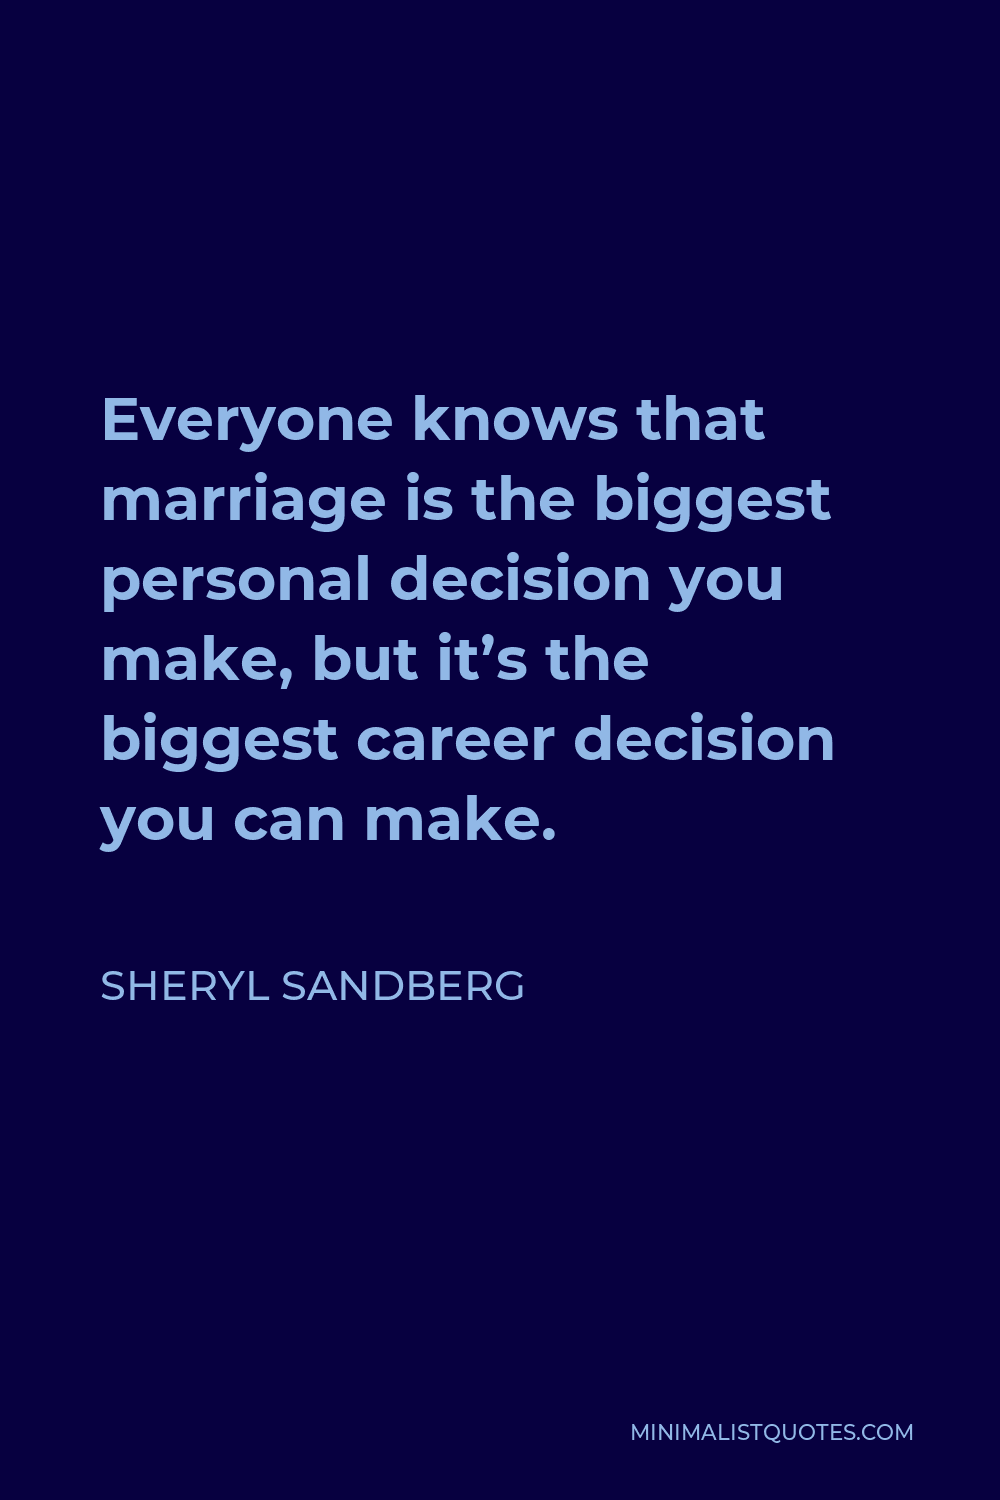 Sheryl Sandberg Quote - Everyone knows that marriage is the biggest personal decision you make, but it’s the biggest career decision you can make.